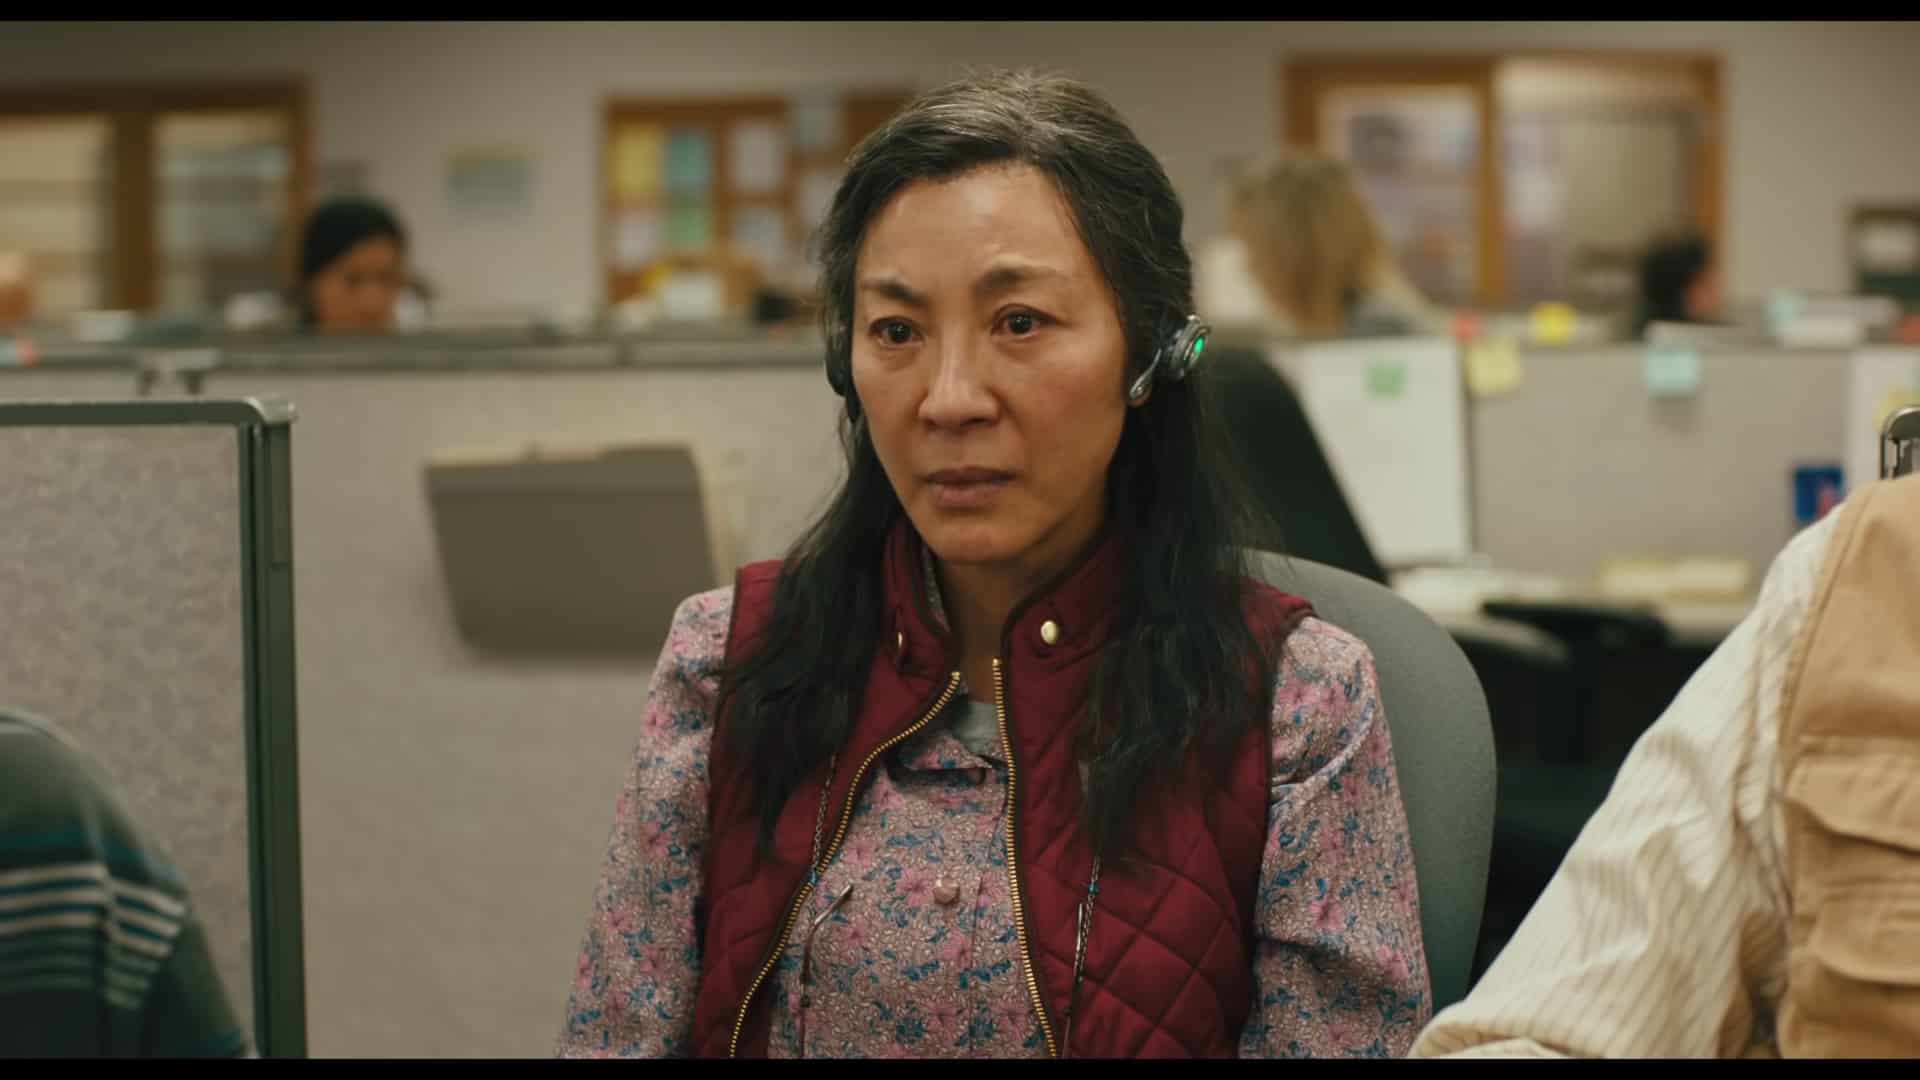 Evelyn (Michelle Yeoh) in a meeting with Deidre